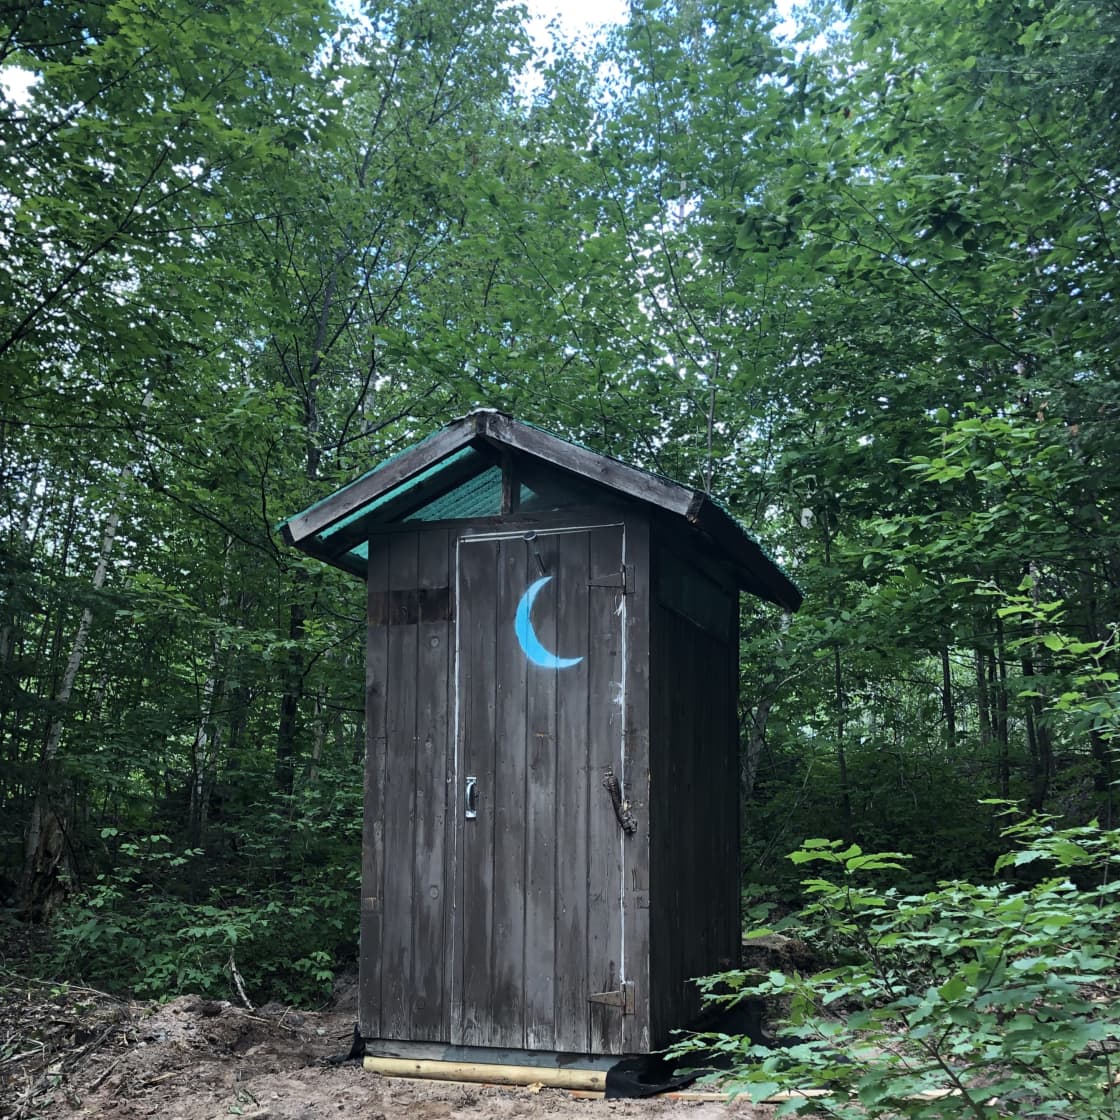 Outhouse is closest to site 4!